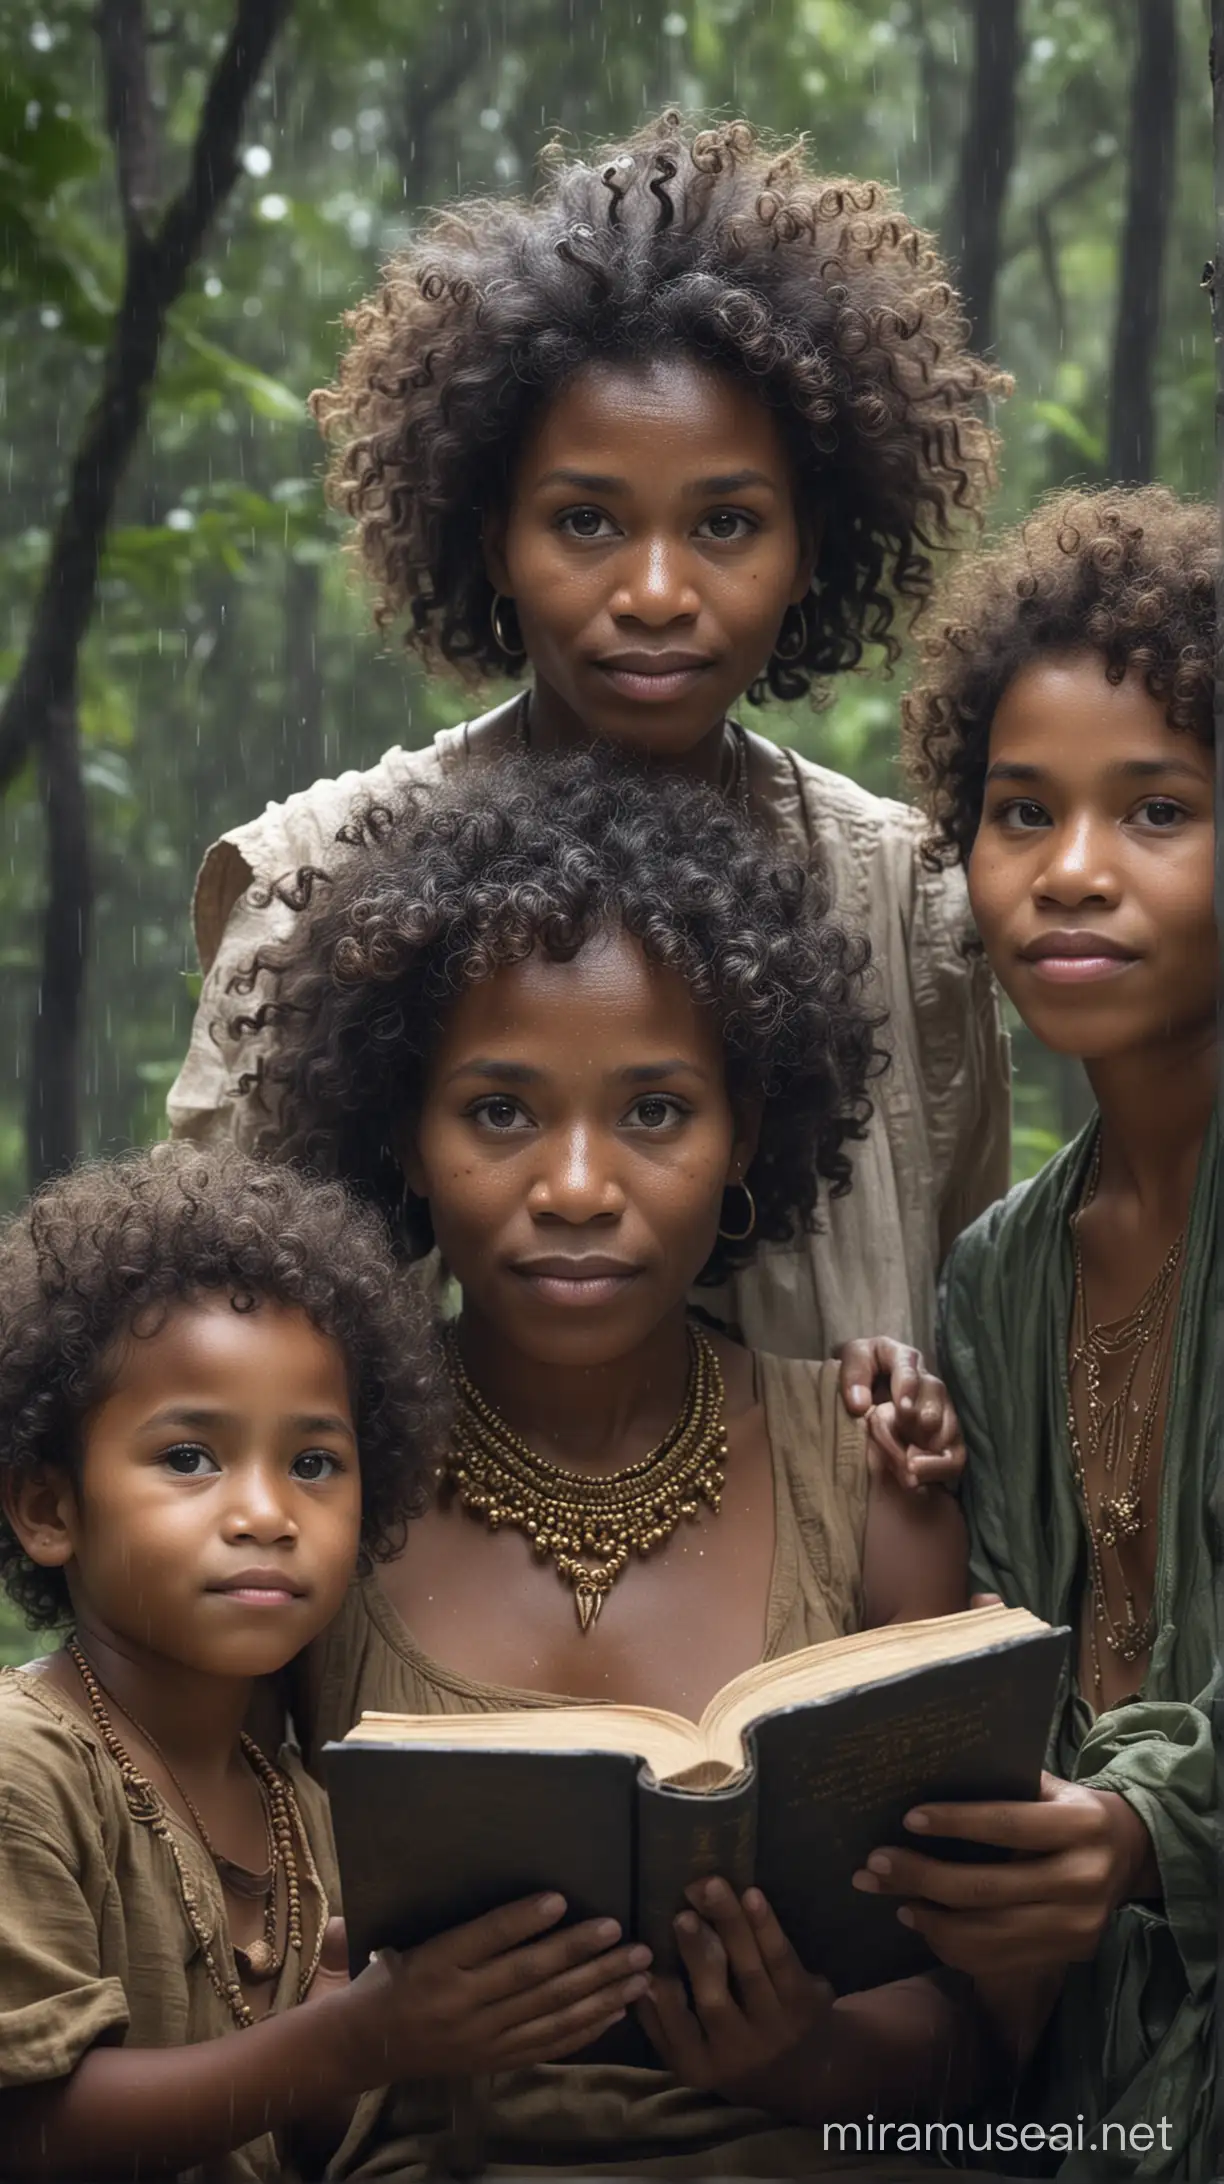 real picture: A beautiful grandmother from Papua with curly hair and black skin is holding a magic book that appears to be shining with a spirit face while teaching her grandchildren from Papua who come from curly hair and black skin in a cloudy and rainy forest. The photo is visibleoriginal, original image of photo taken 360, full HD